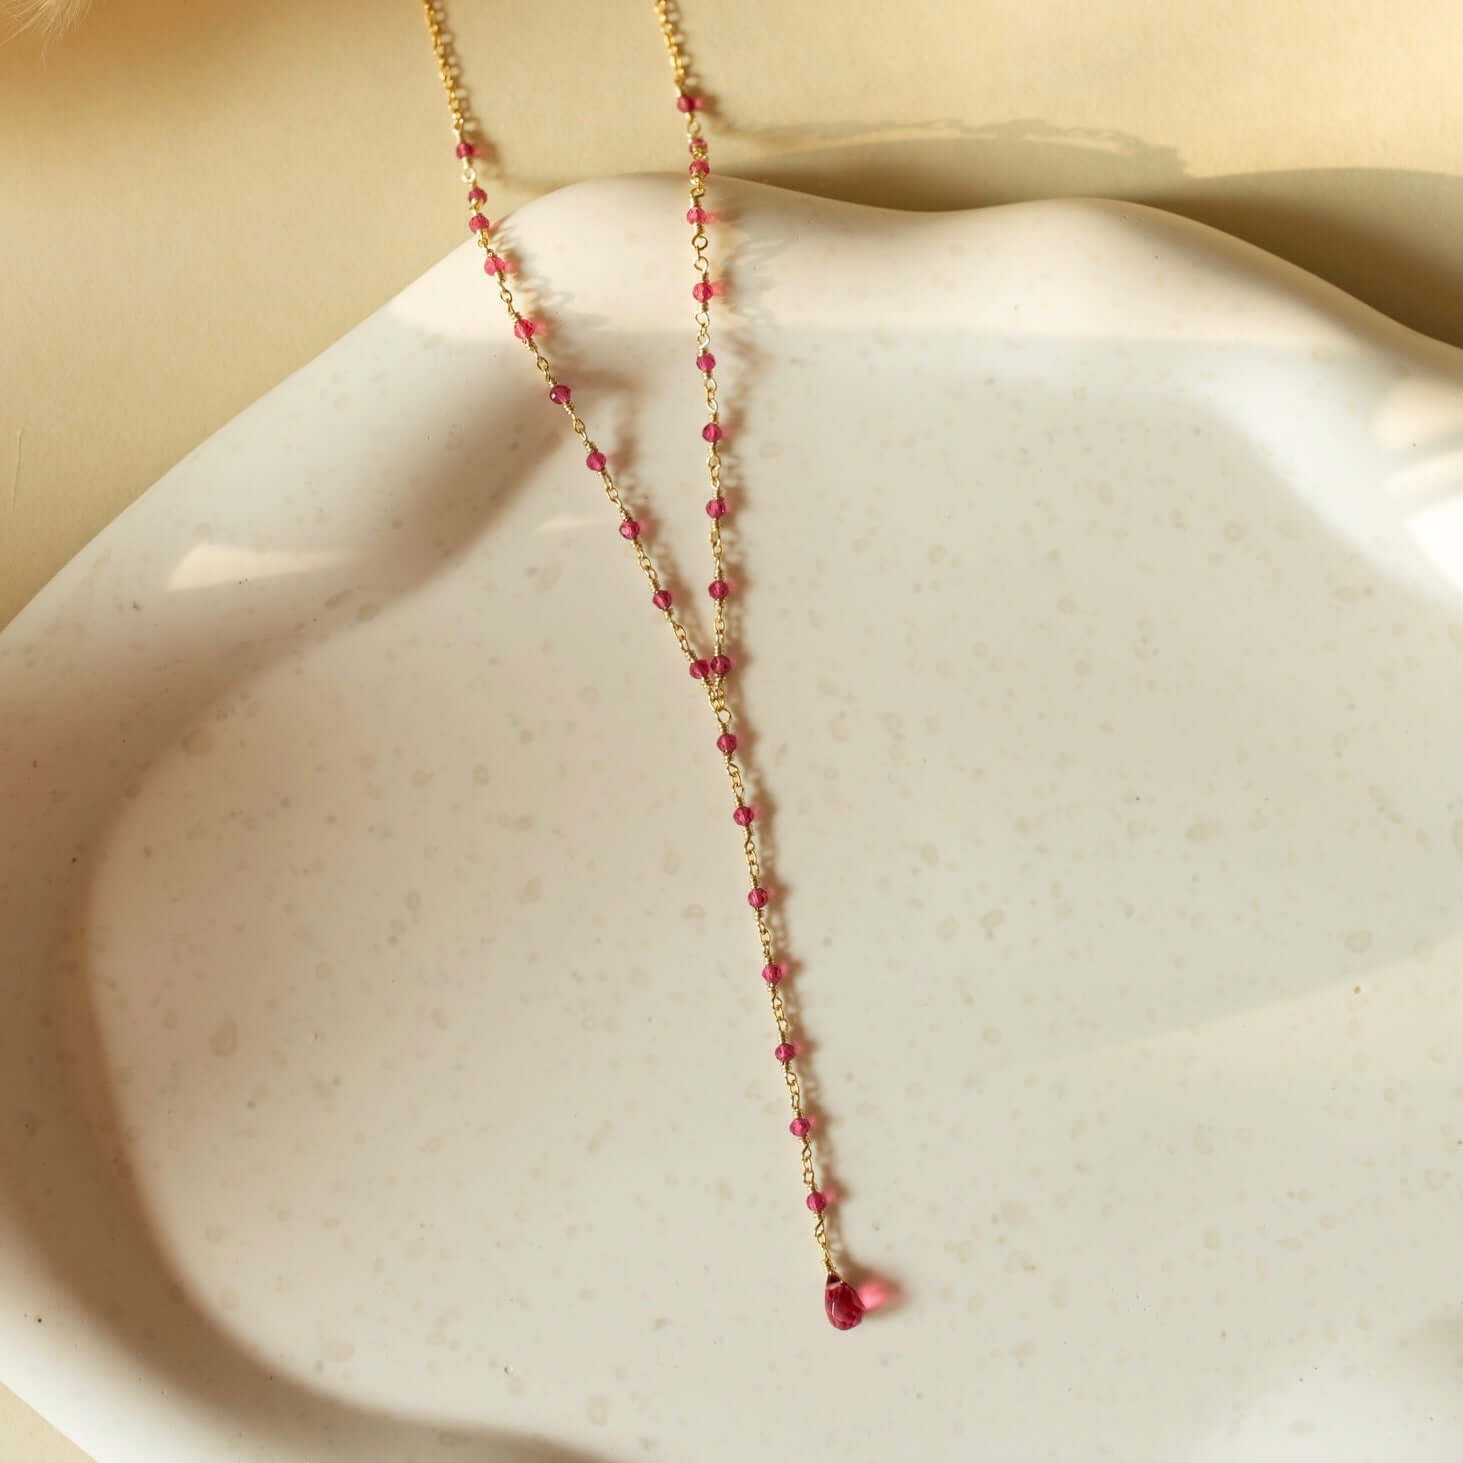 Simple beauty: pink tourmaline quartz necklace on a clay plate.